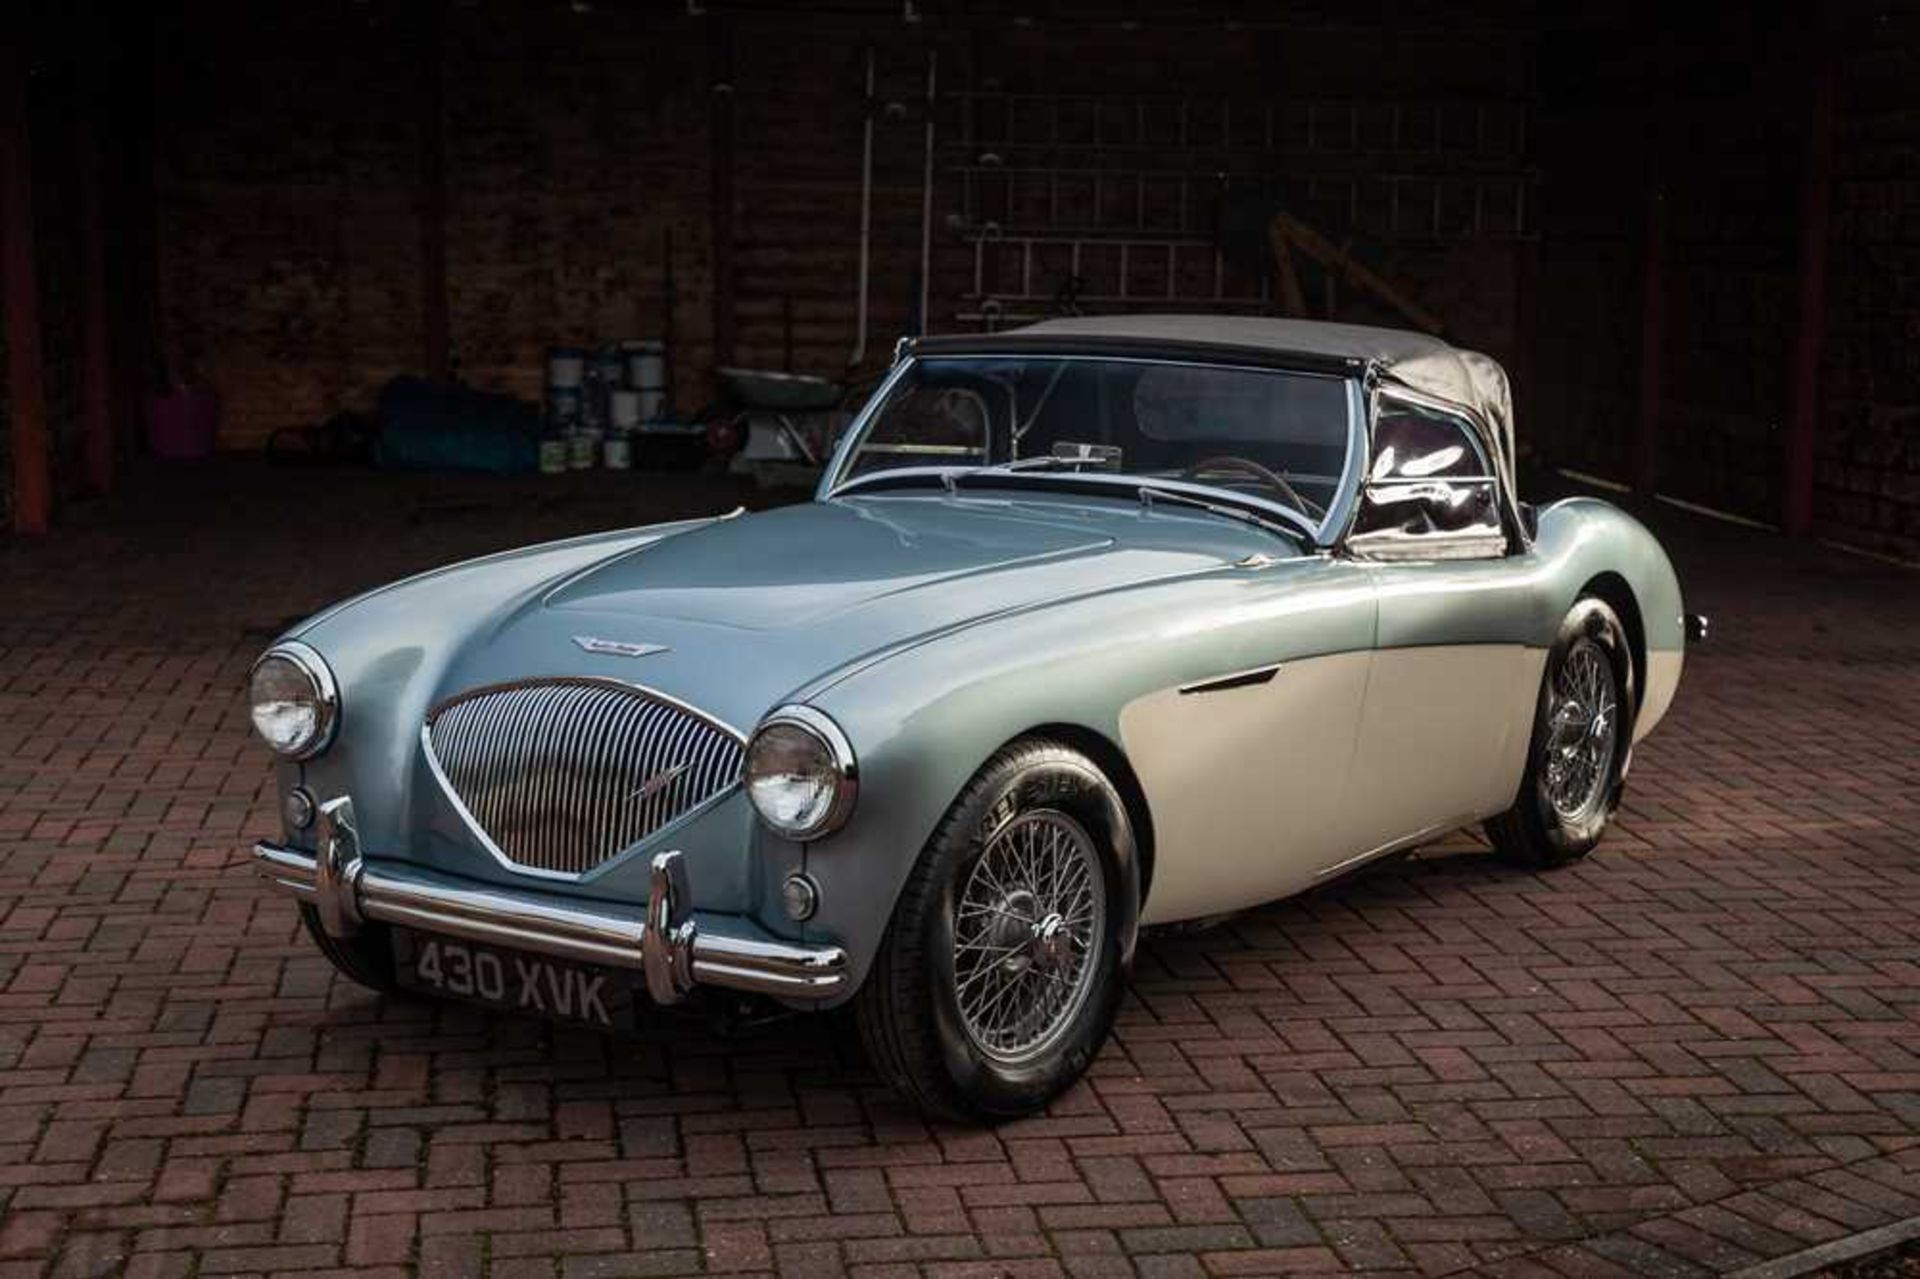 1955 Austin-Healey 100/4 Subtly Upgraded with 5-Speed Transmission and Front Disc Brakes - Image 48 of 54